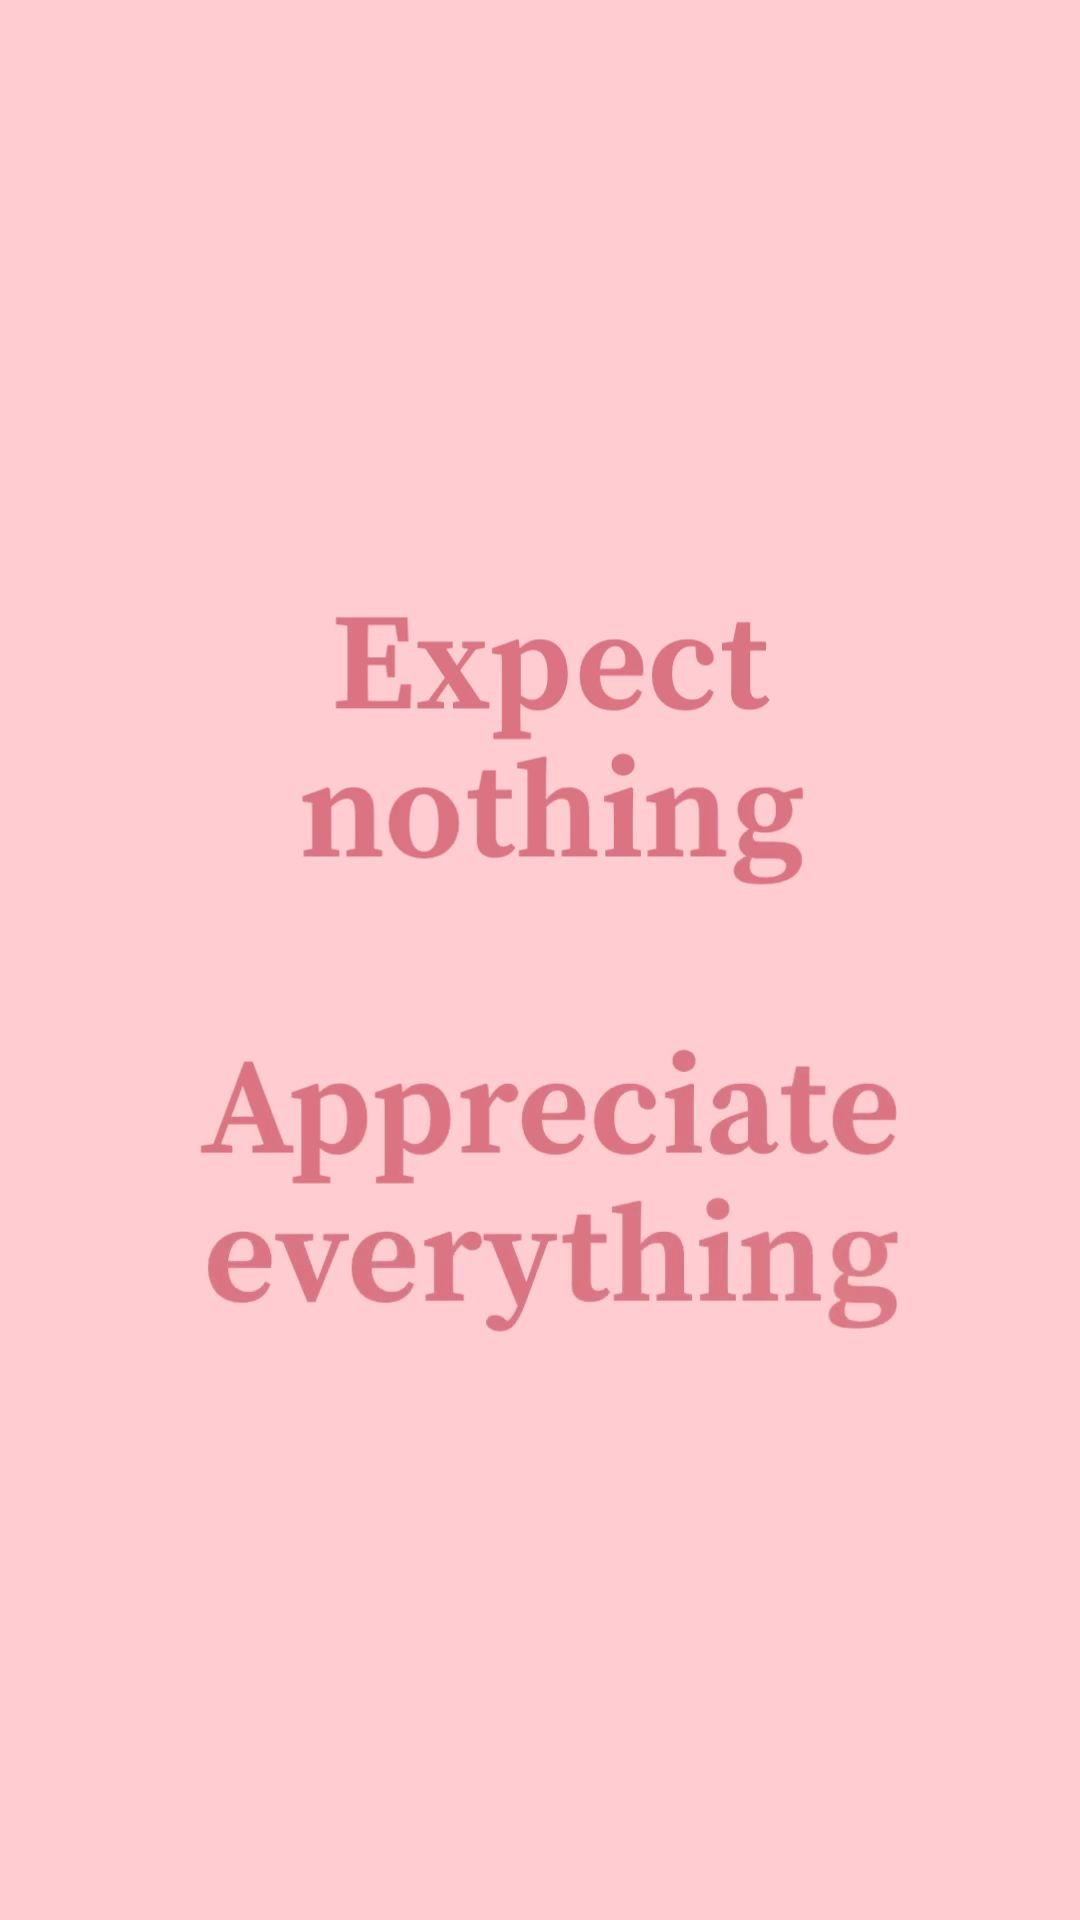 Life quote - expect nothing -   15 skin care Quotes funny ideas